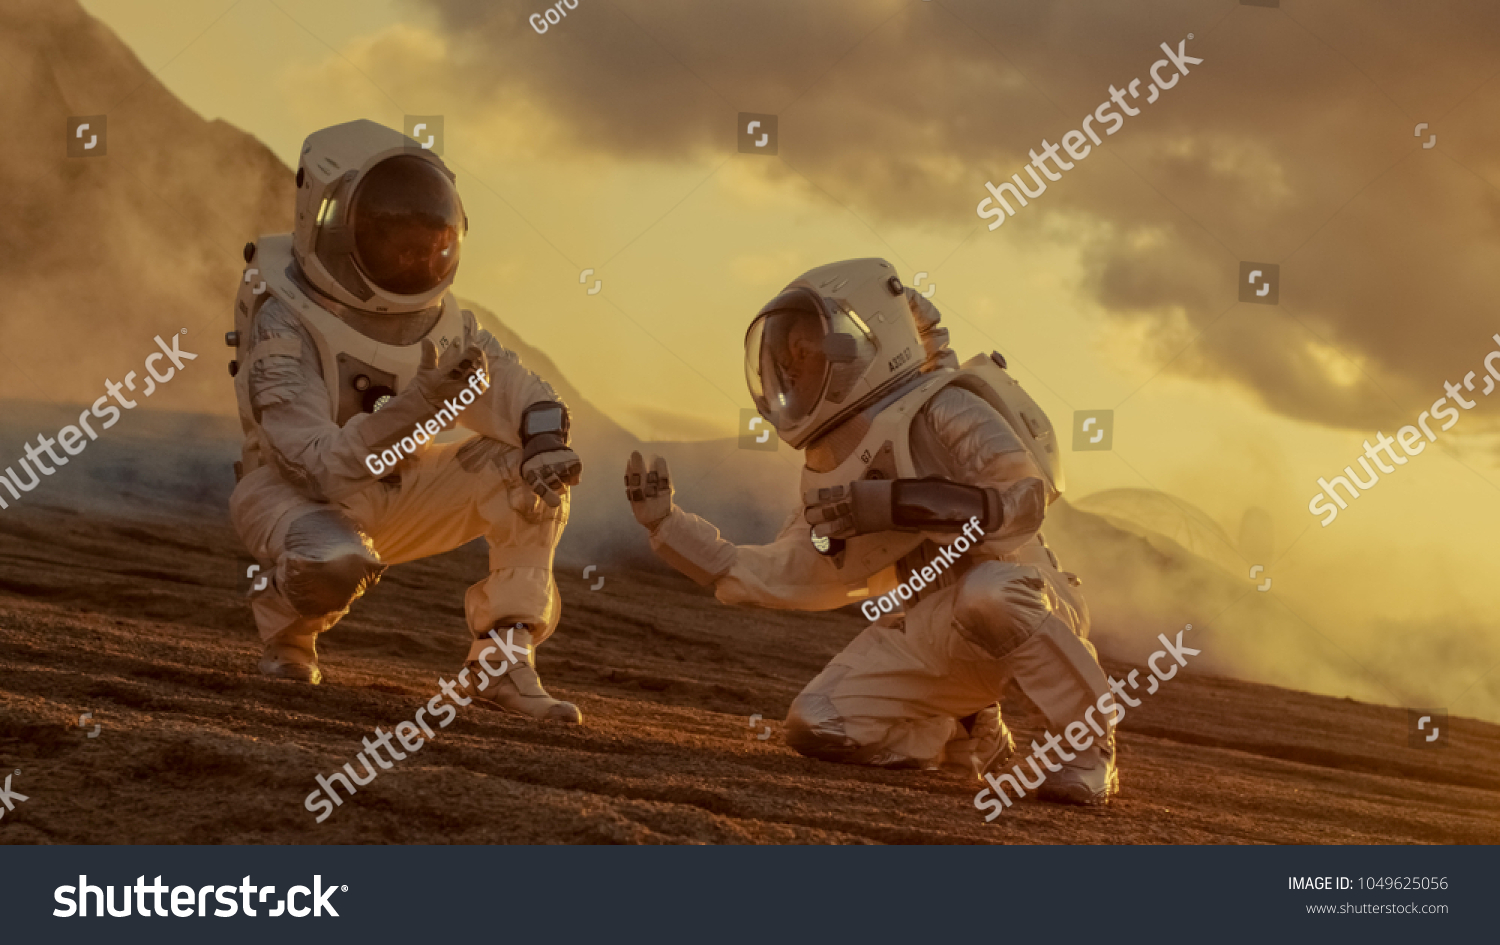 Two Astronauts Collect Soils Samples on Alien Planet, Analyzing Them with Hands Computer. Mars/ Red Planet Manned Expedition. #1049625056